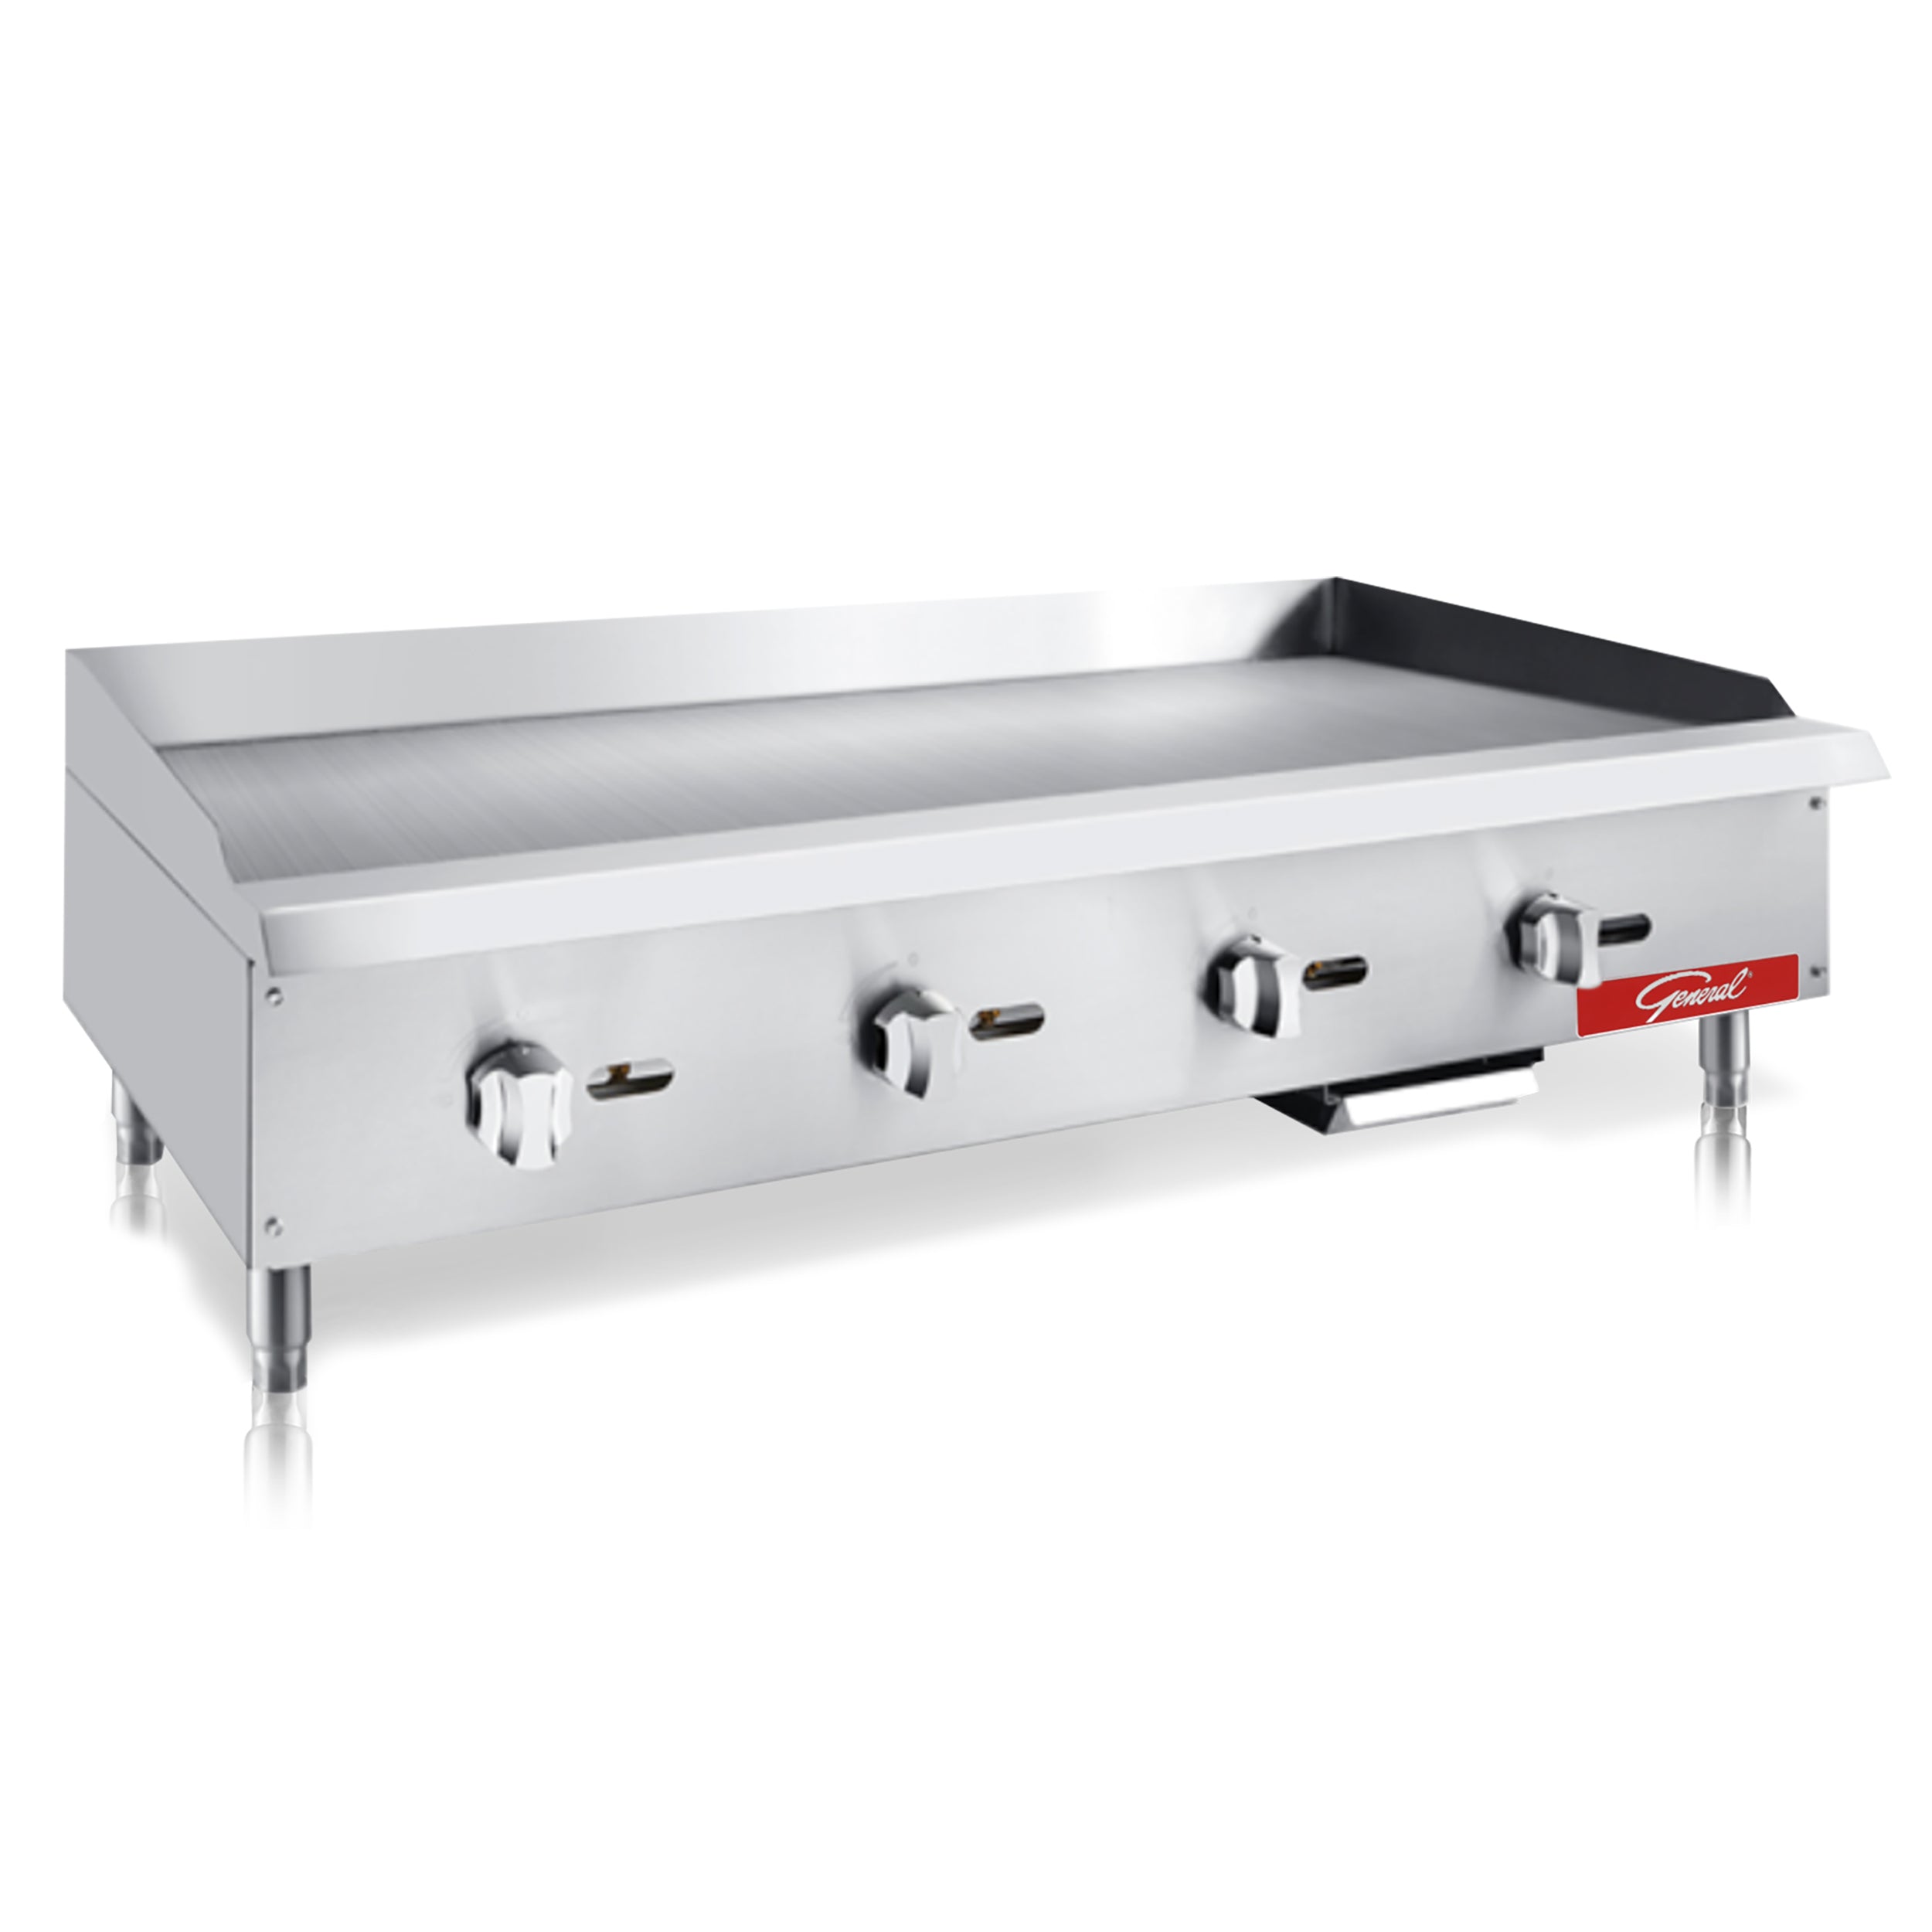 24 LP Propane Flat Top Griddle Commercial Flat Grill 